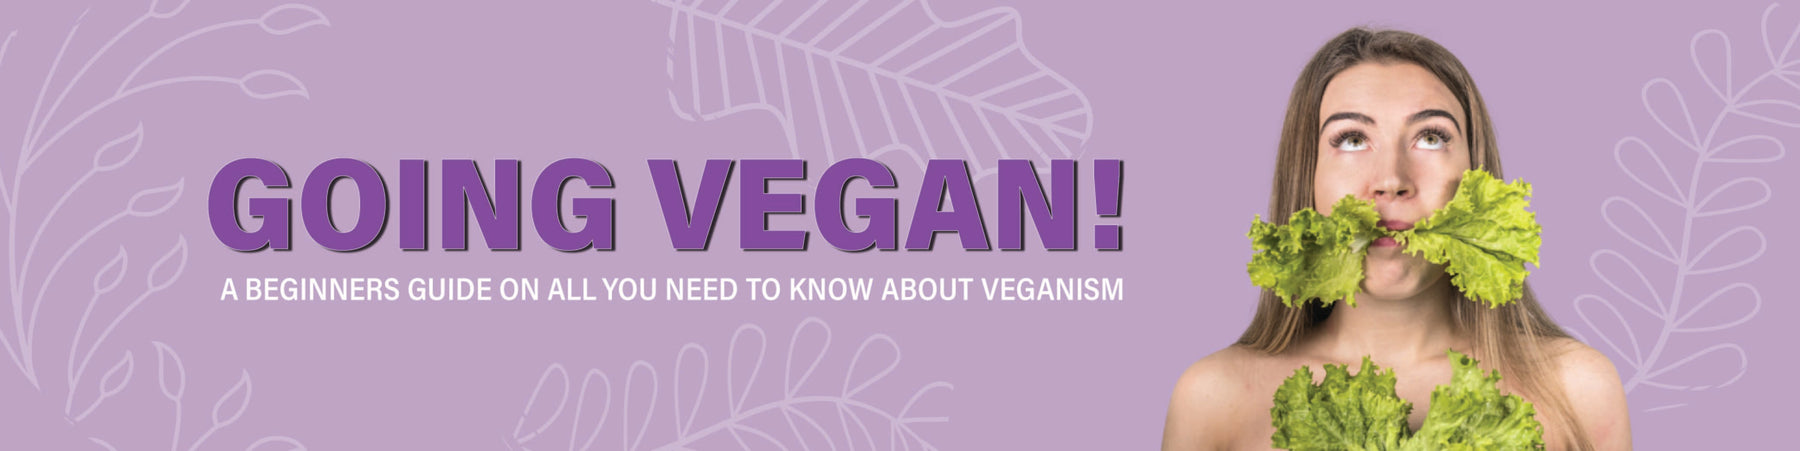 Going Vegan? — A Guide for Beginners | Articles | OPTMZ | 